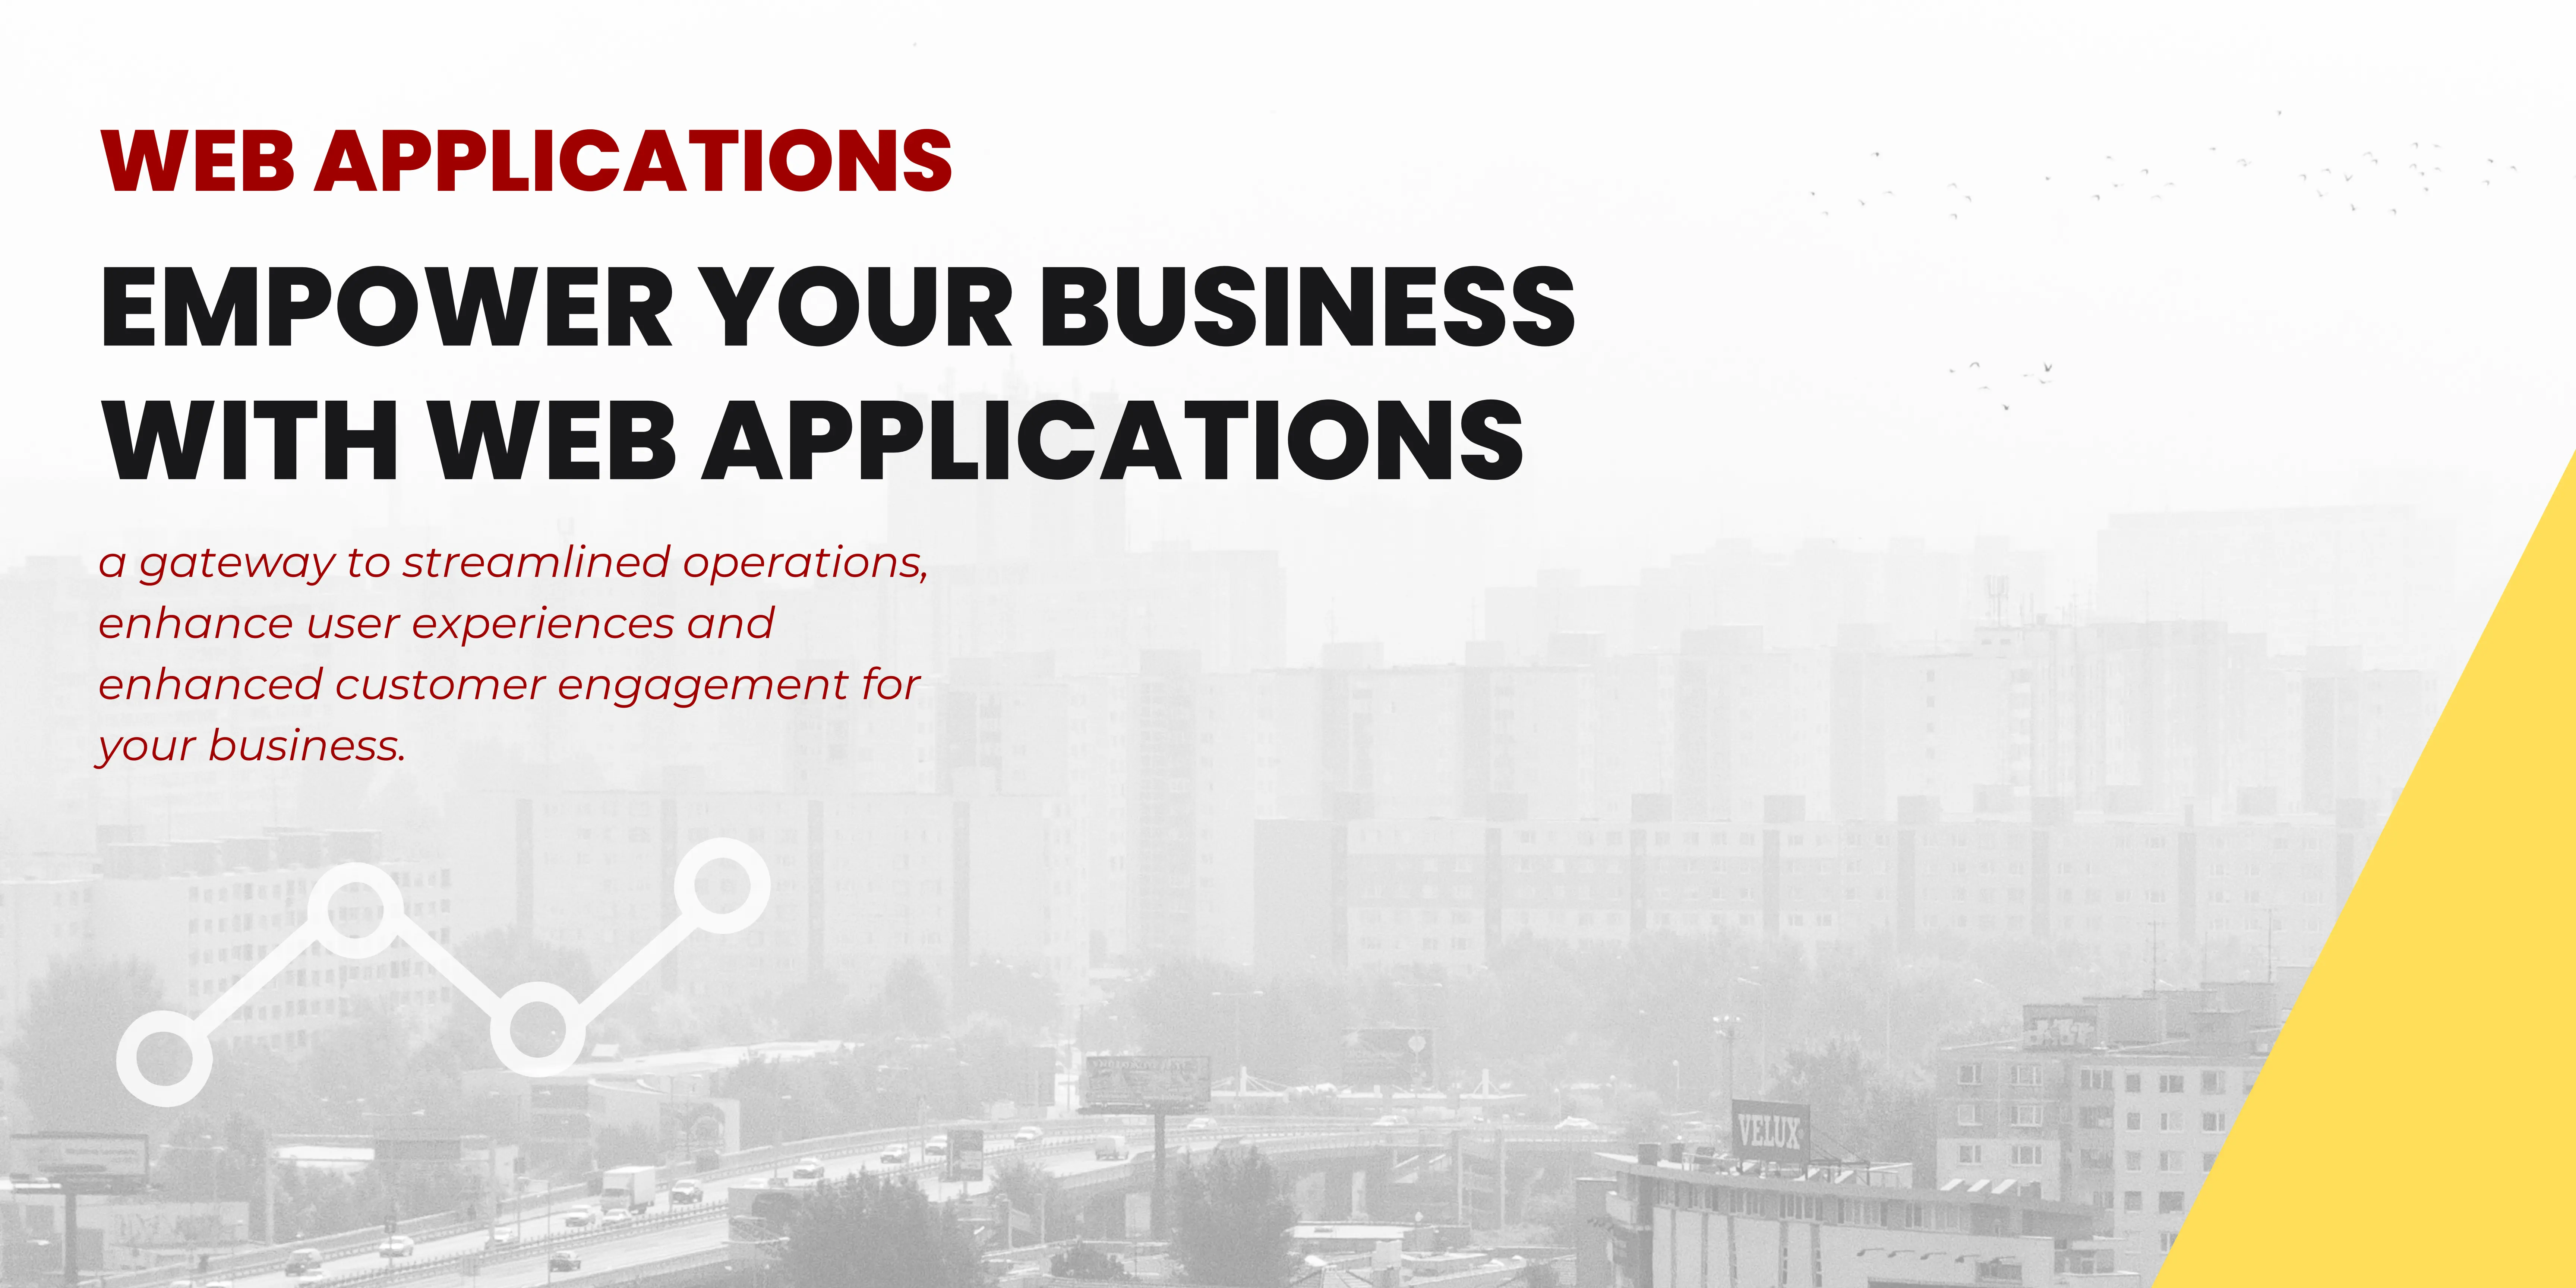 Empower Your Business with Custom Web Applications for Growth and Innovation